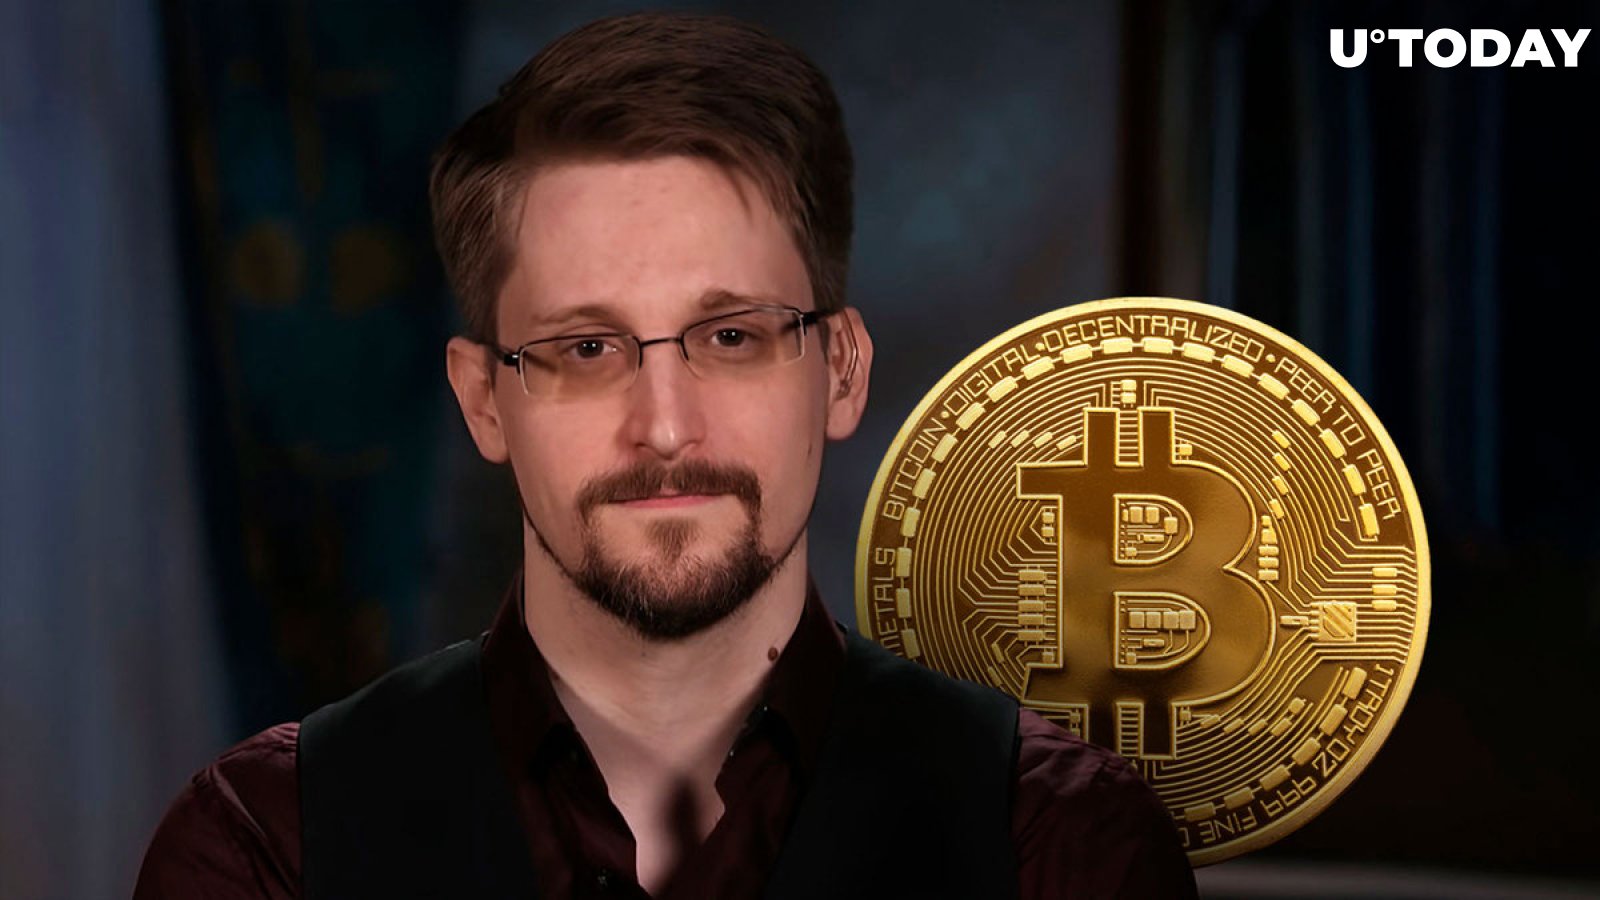 BTC Expert Edward Snowden to Speak at Bitcoin Amsterdam Conference This Year